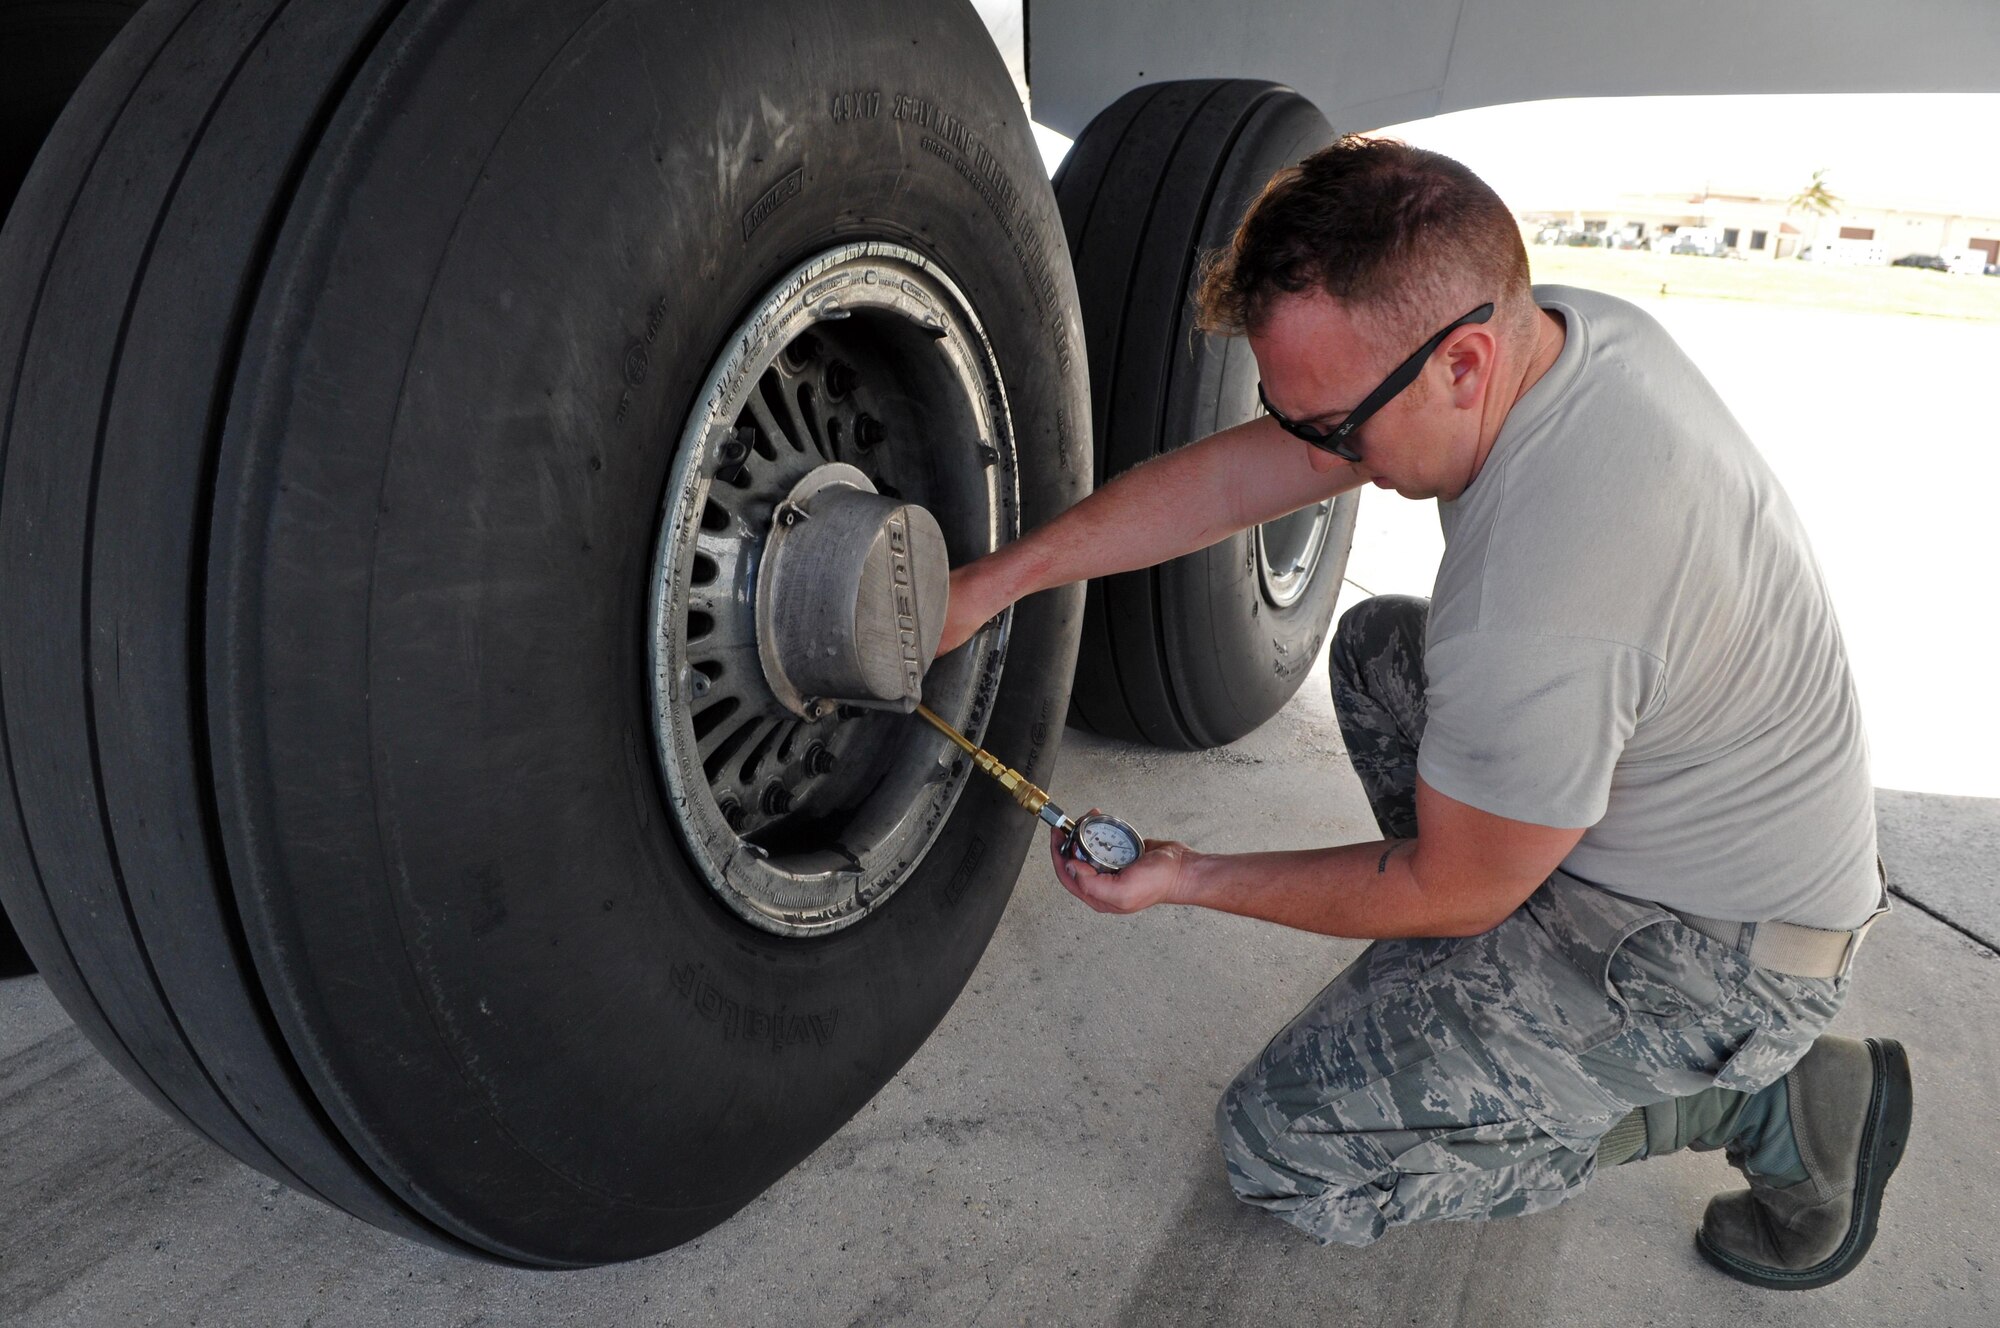 Master Sgt. George LaCome, a crew chief with the 151st Maintenance Group checks the tire pressure on a KC-135R Stratotanker during a preflight inspection in Andersen Air Force Base, Guam. The Utah Air Guard aircraft and six-person crew conducted an aeromedical evacuation mission in the Pacific theater Feb. 8-25, 2017.